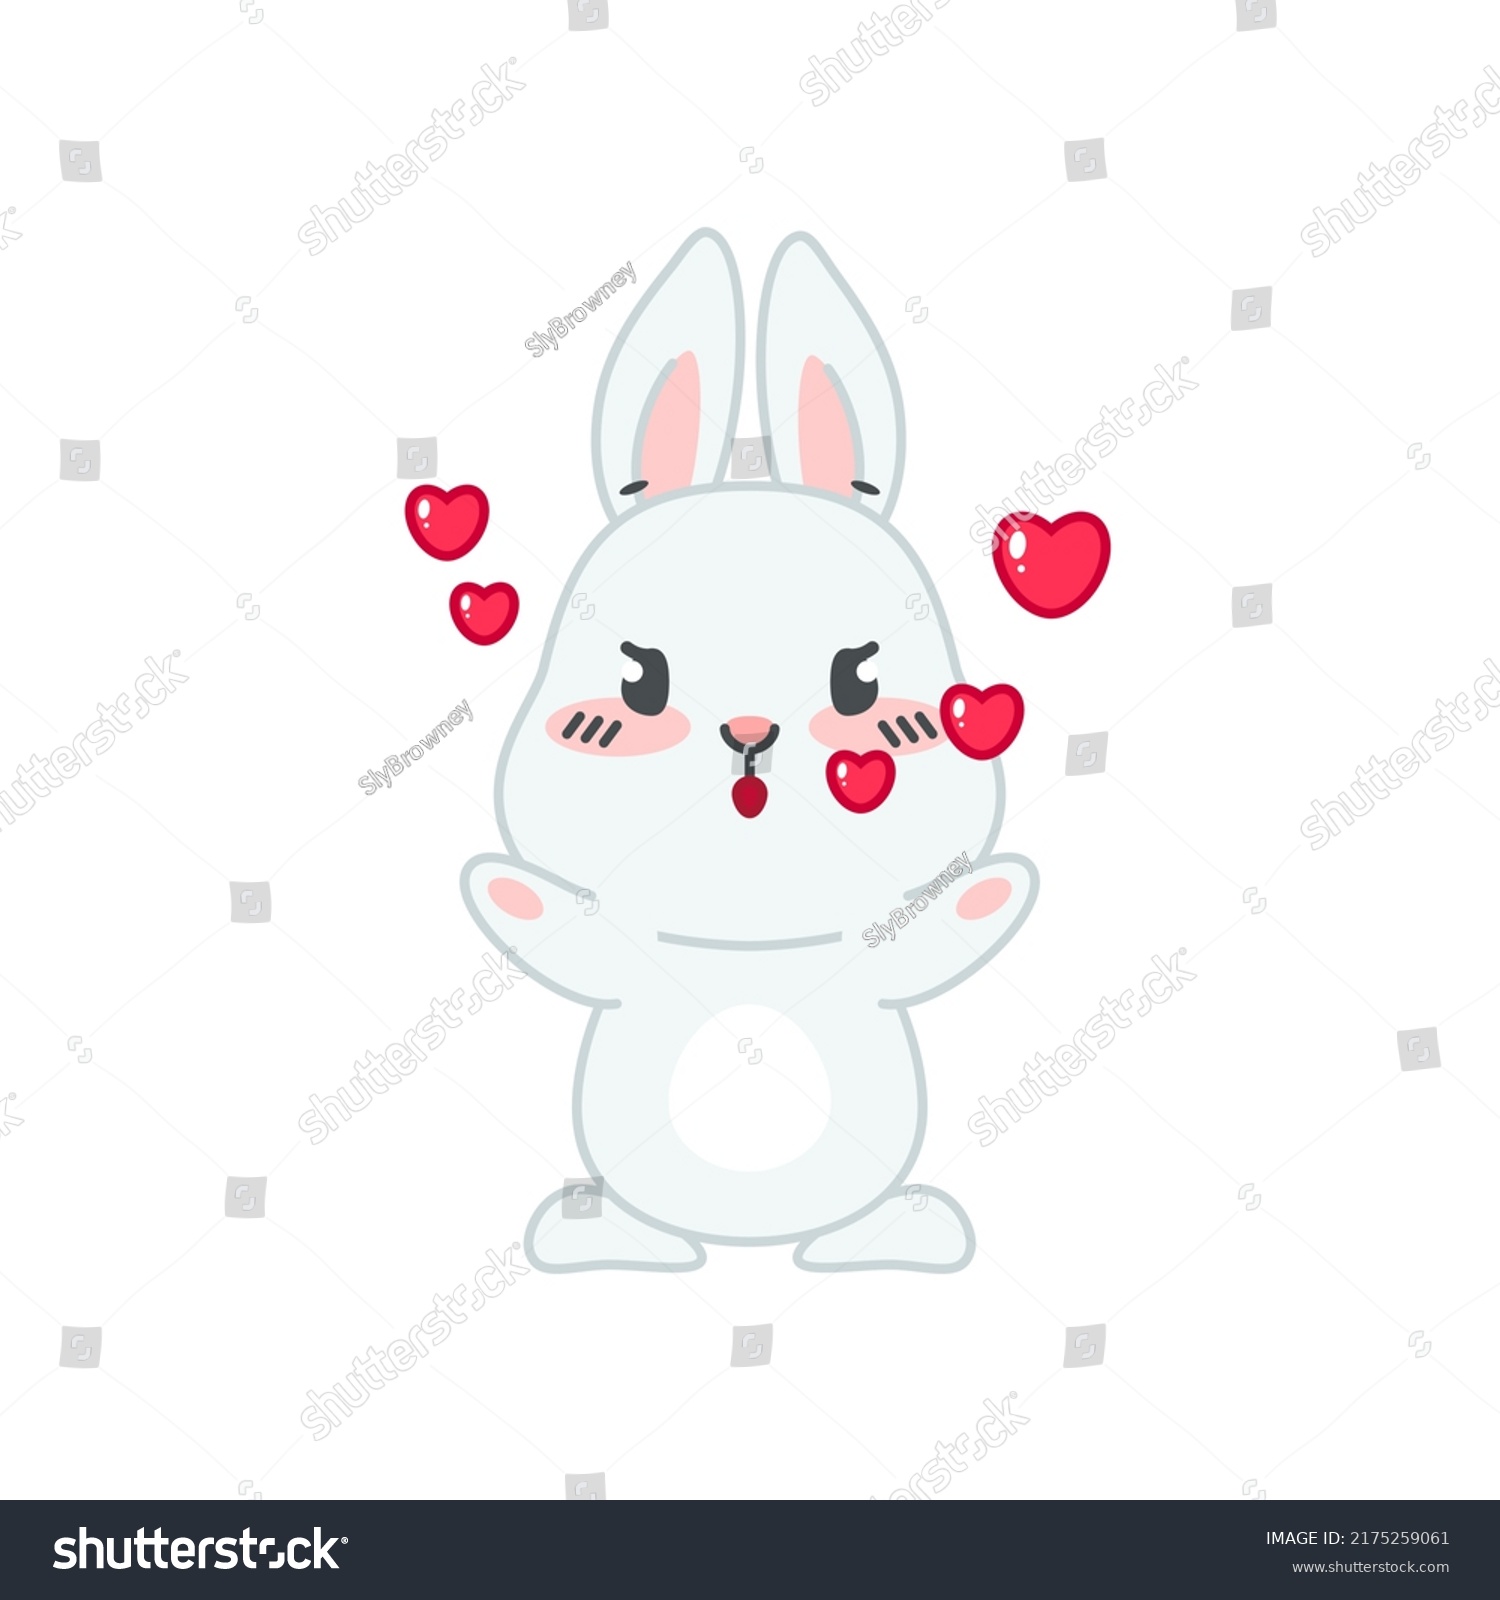 SVG of Cute bunny in love. Flat cartoon illustration of a funny little gray rabbit blowing a kiss isolated on a white background. Vector 10 EPS. svg